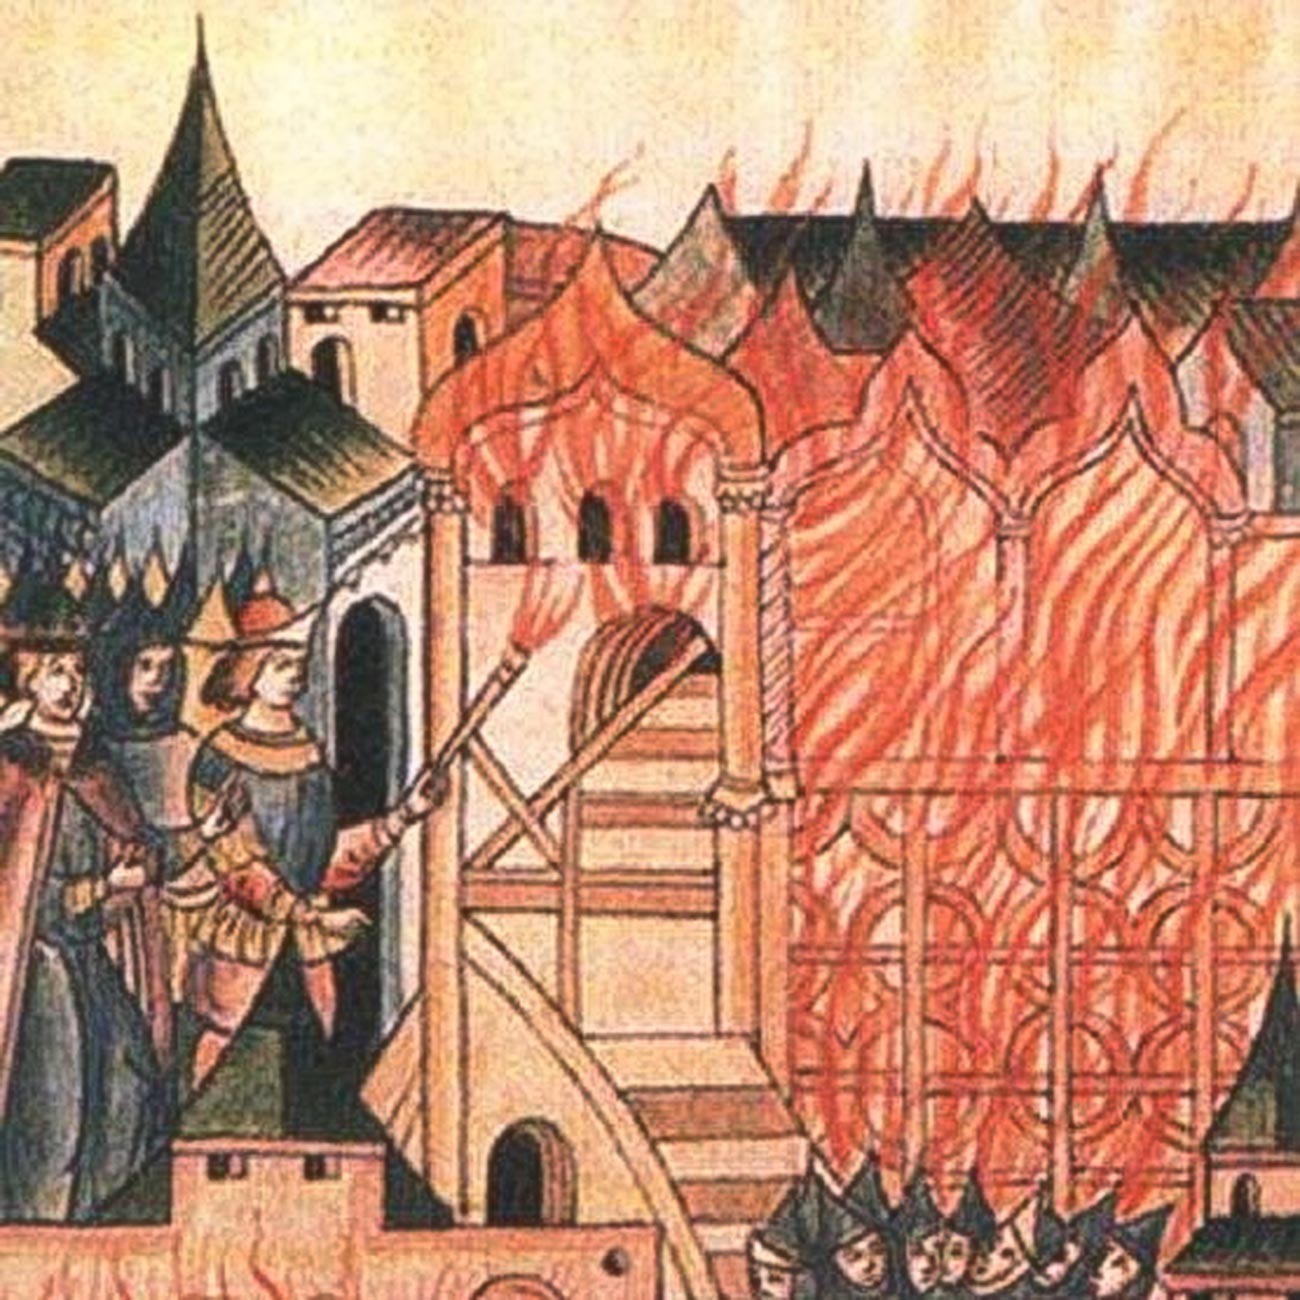 The Tver uprising of 1328 as seen in a Russian chronicle of the 16th century